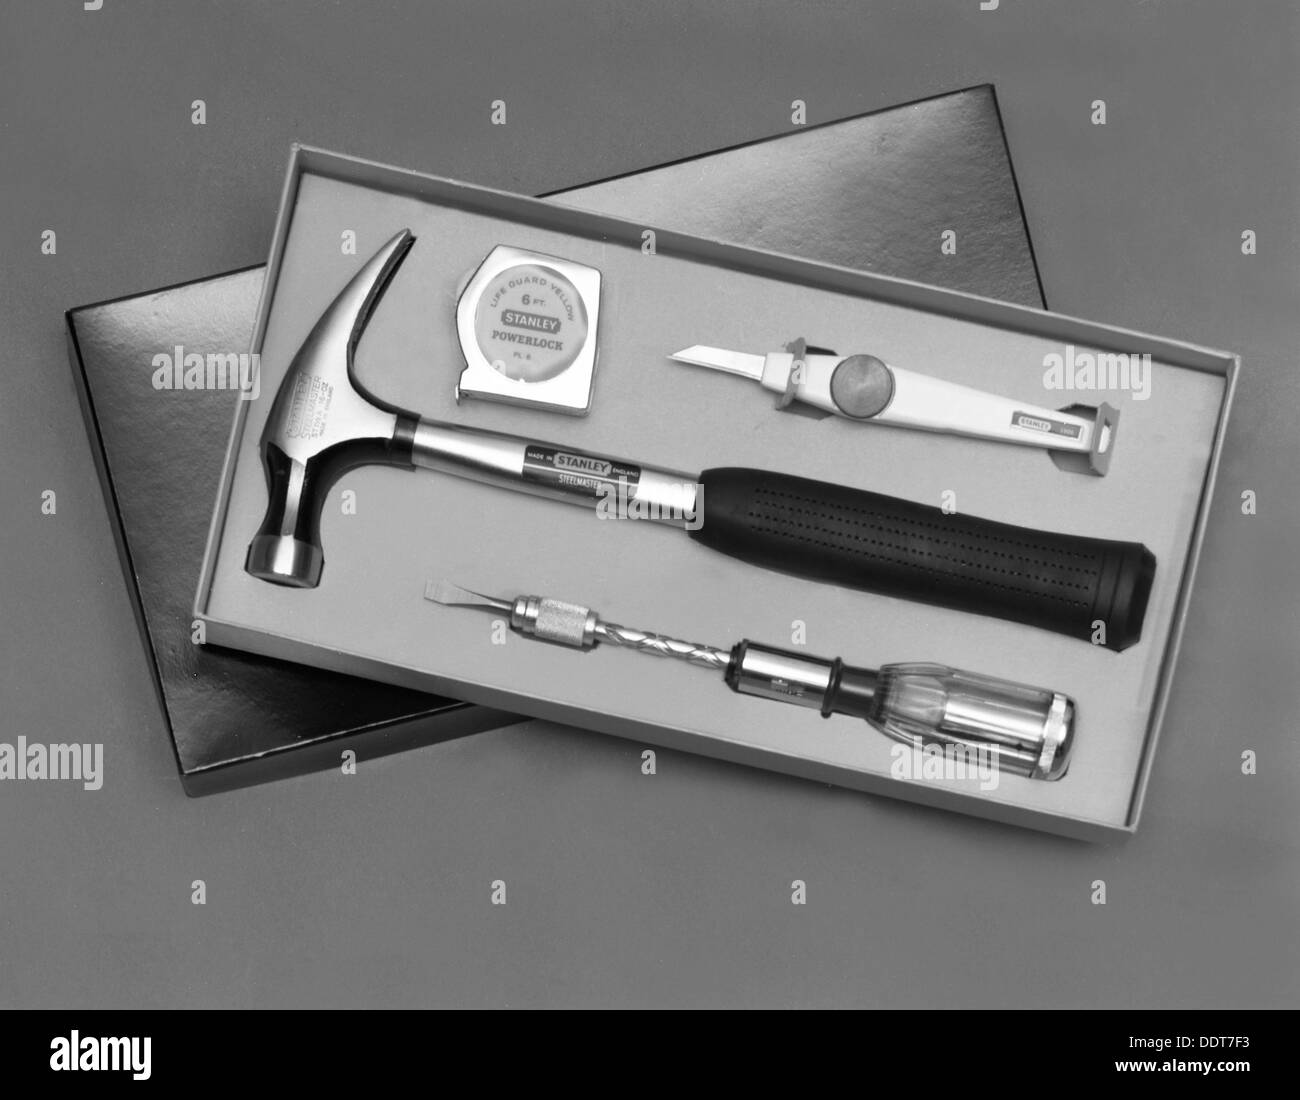 2,894 Stanley Tools Images, Stock Photos, 3D objects, & Vectors